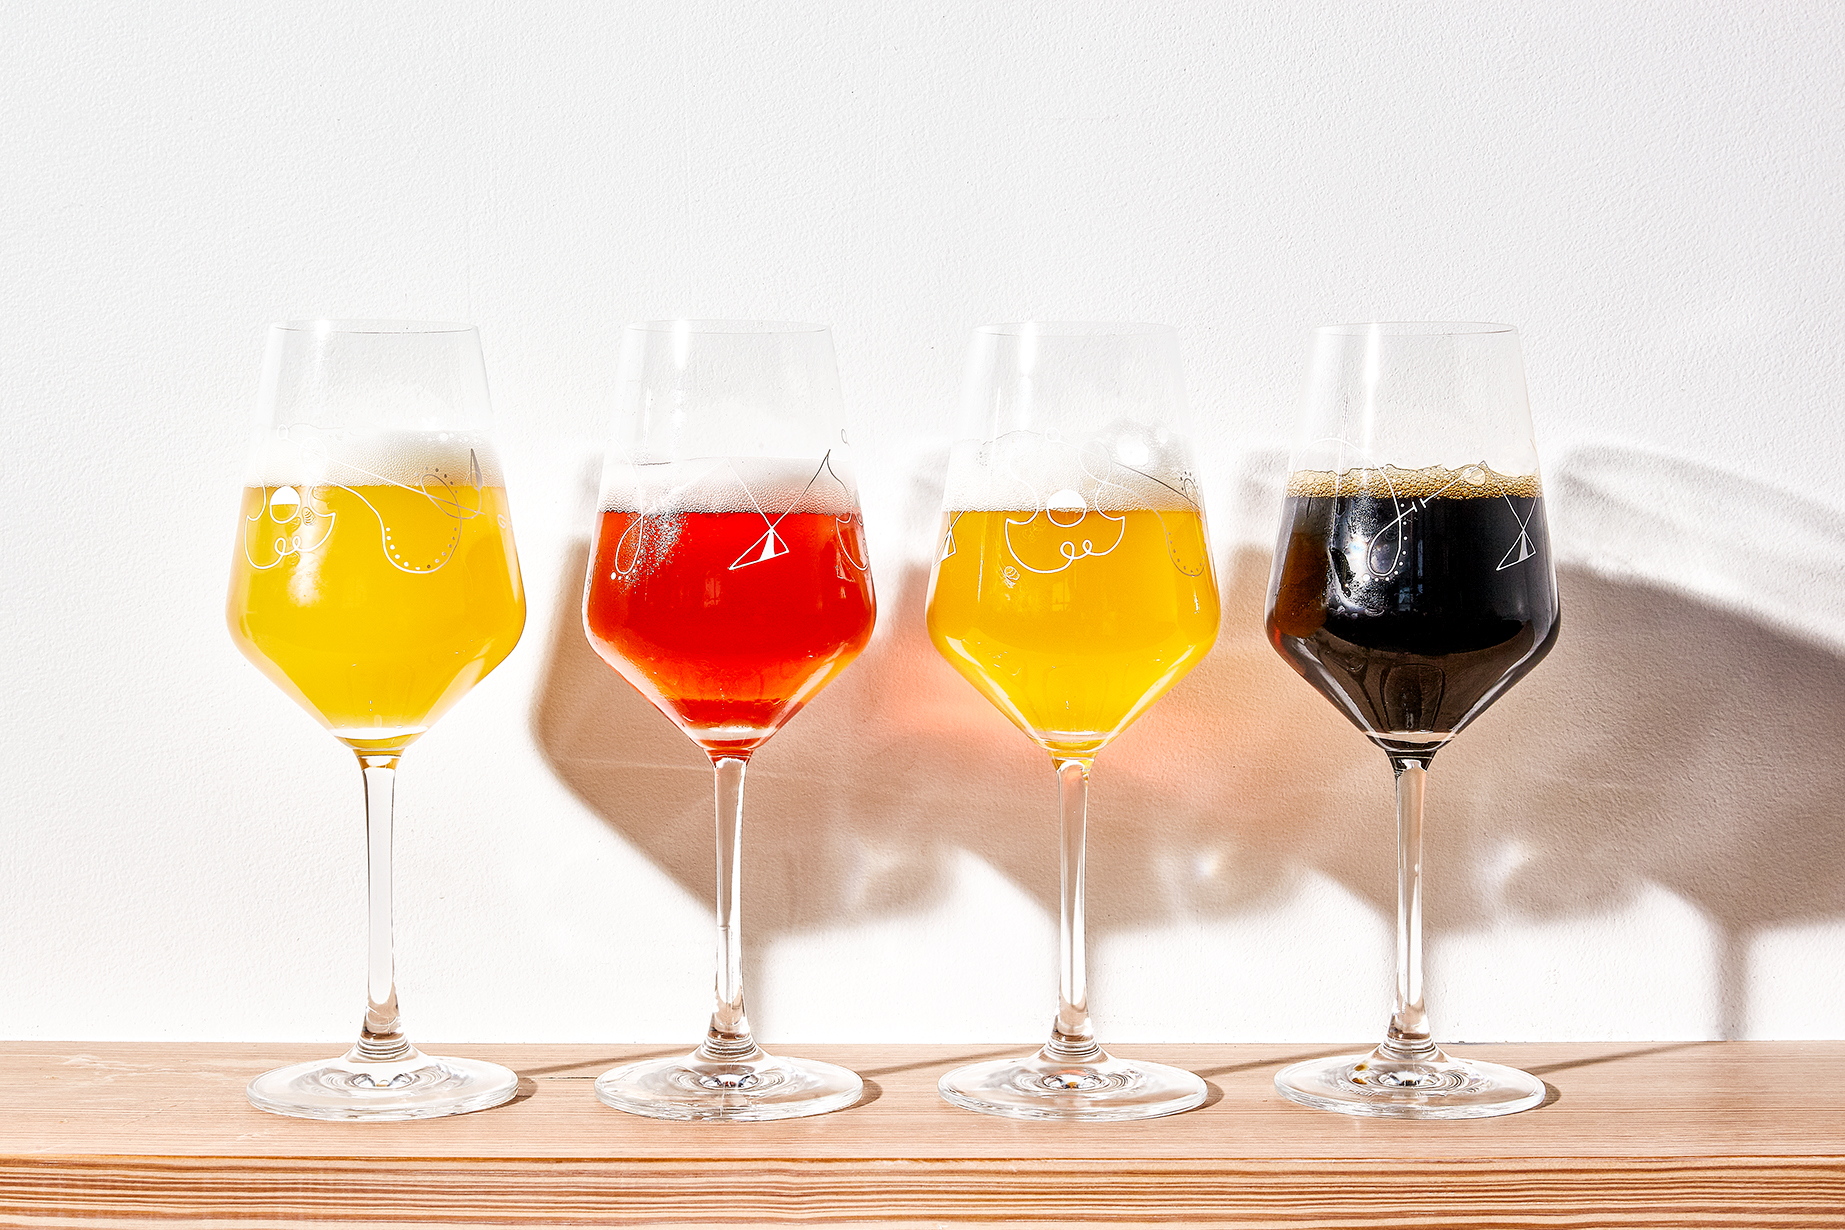 An assortment of four colorful beers from Grimm, a brewery based in East Williamsburg.